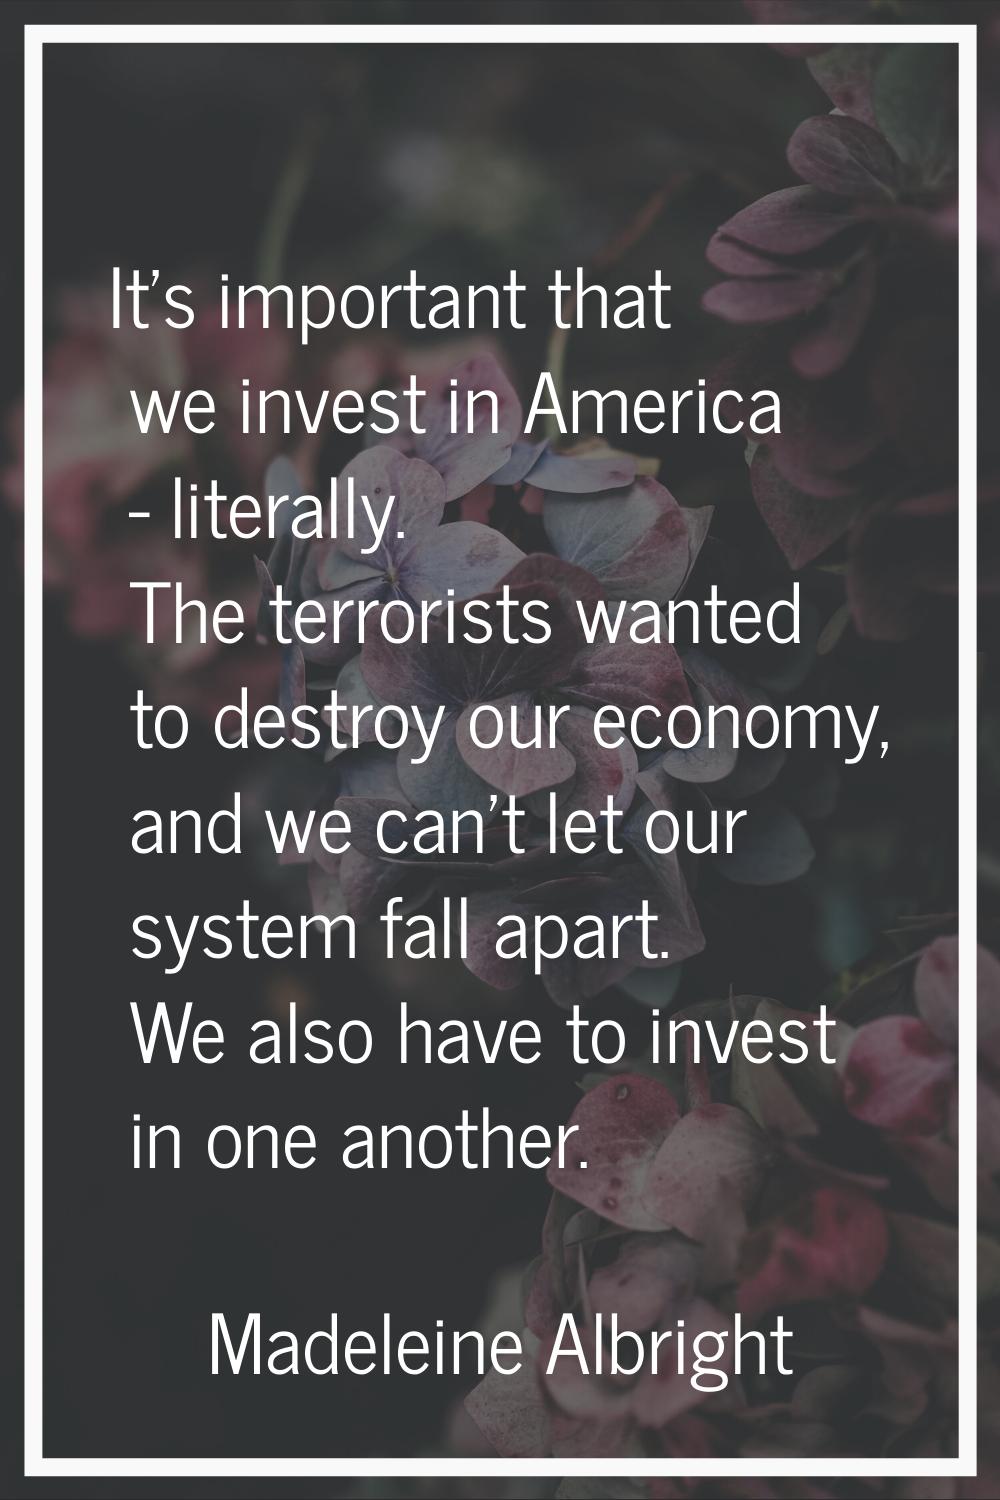 It's important that we invest in America - literally. The terrorists wanted to destroy our economy,